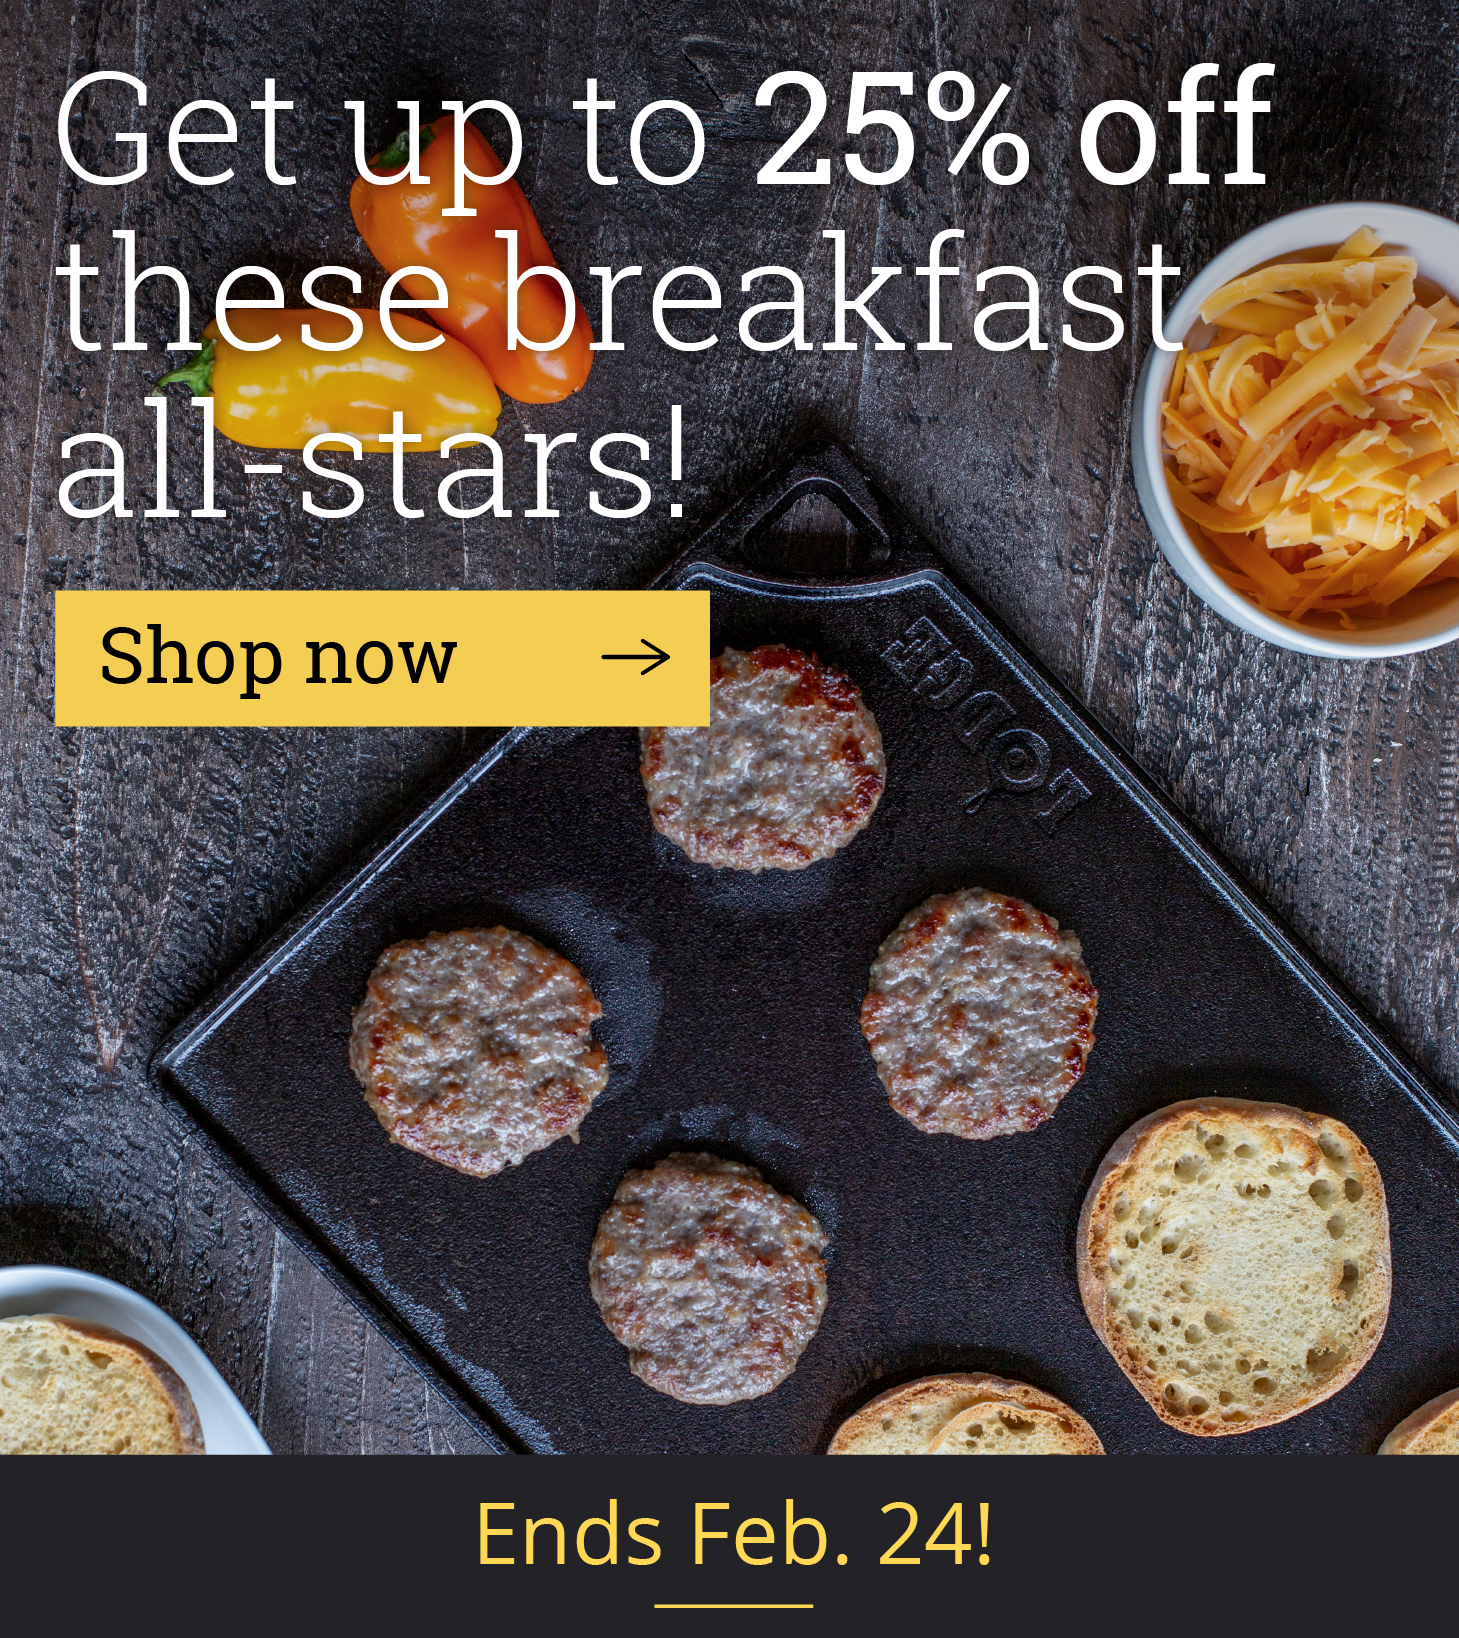 Get up to 25% off these breakfast all-stars! [Shop now]  Ends Feb. 24!